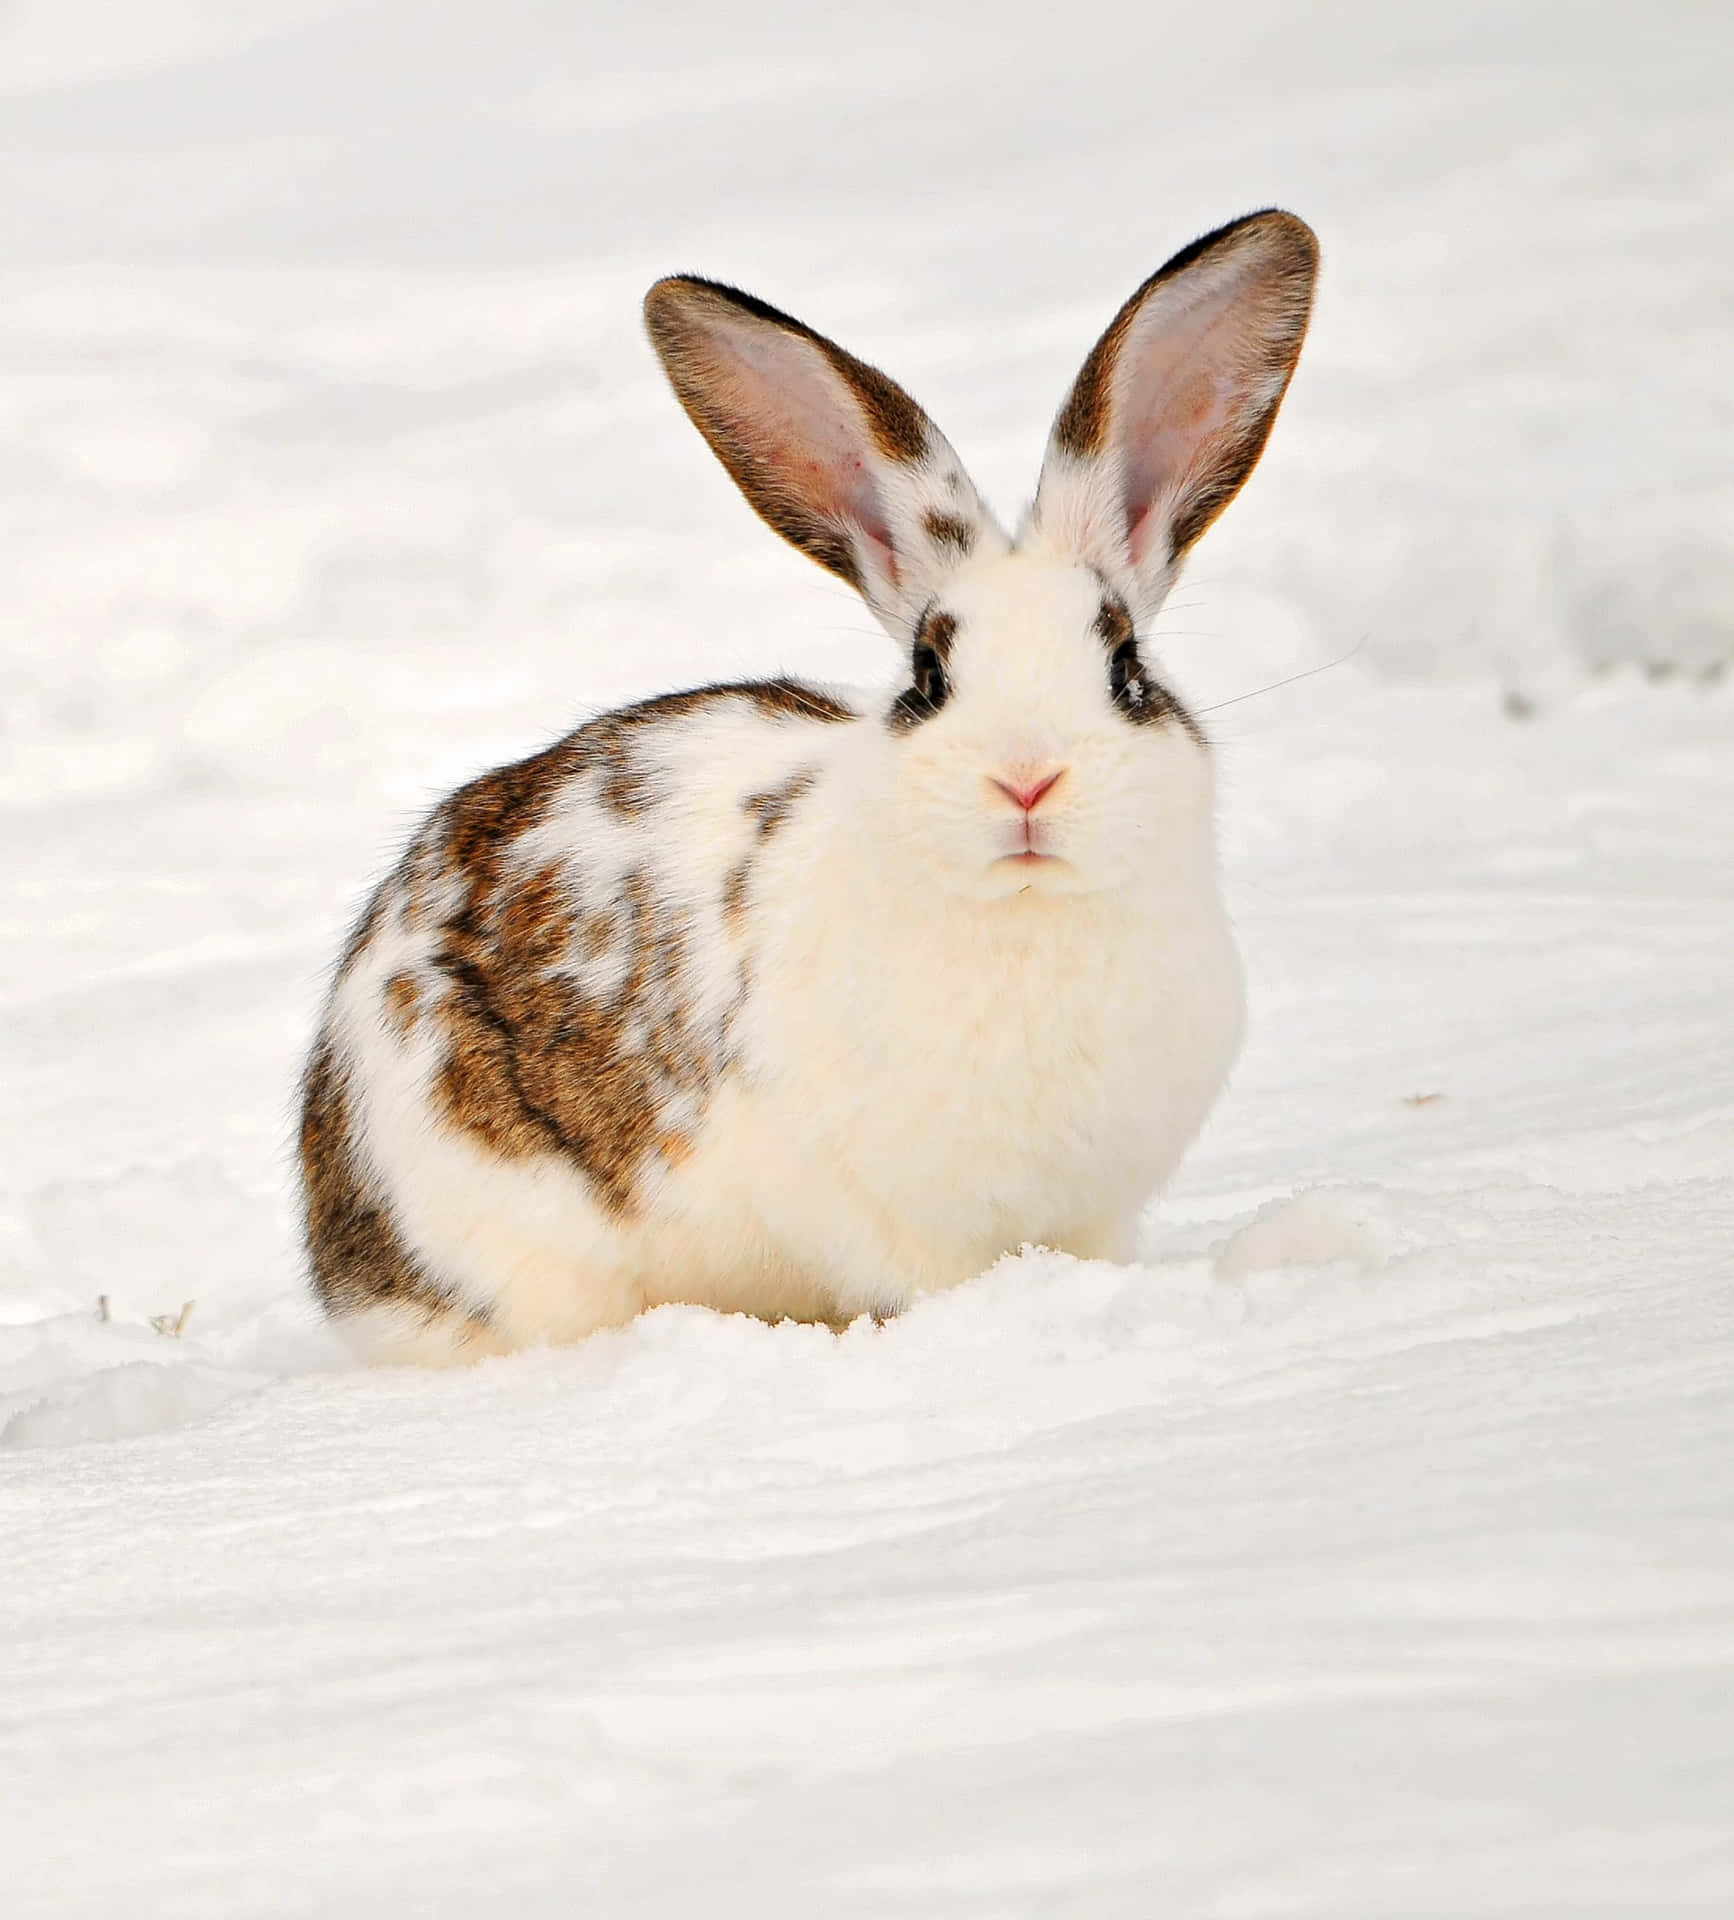 A fluffy bunny stays alert and looks around its environment.